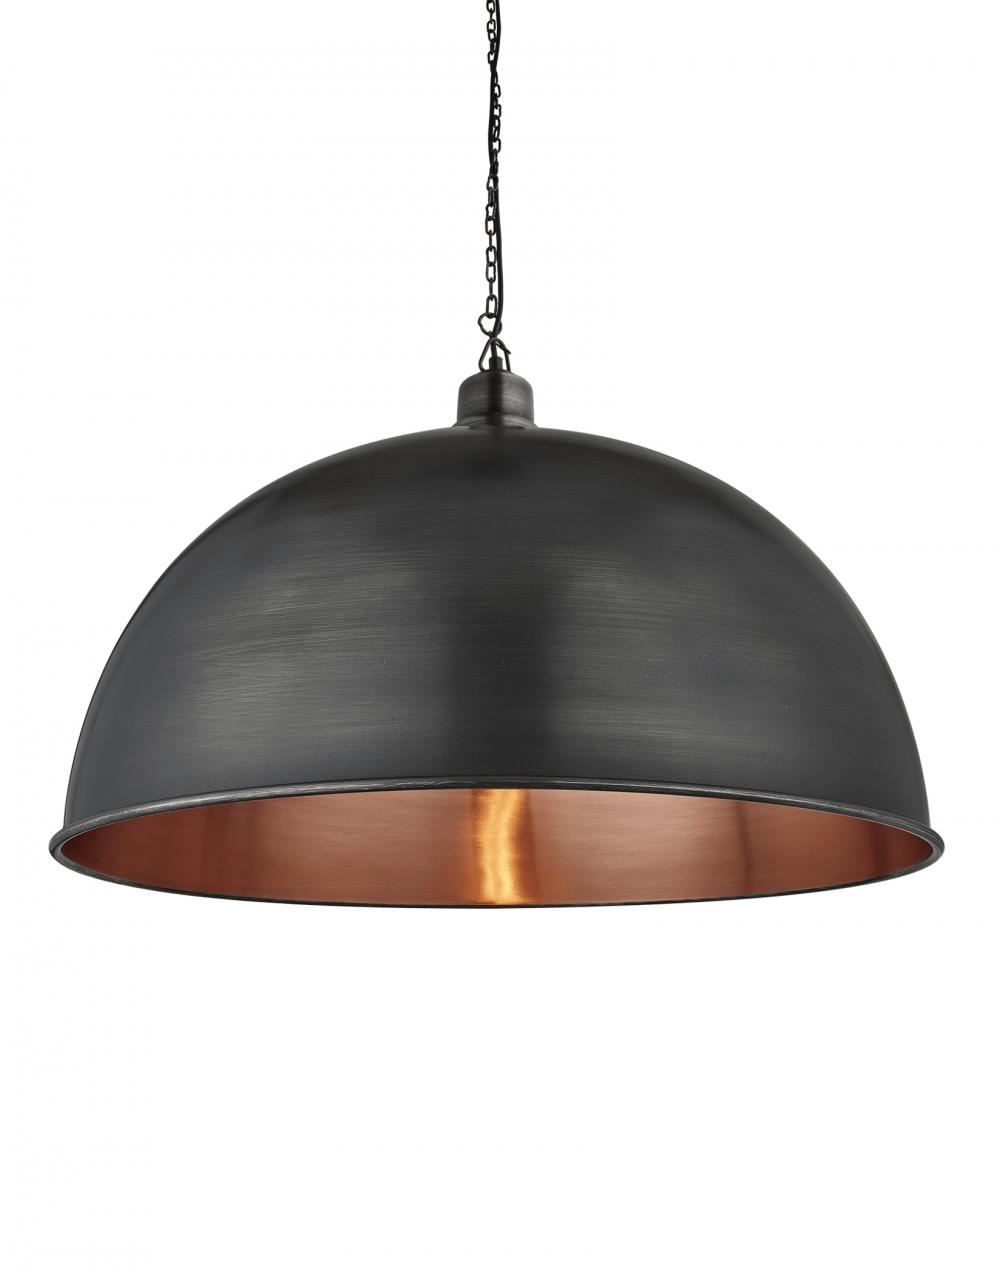 Brooklyn Vintage Metal Giant Dome Pendant Light Pewter Copper